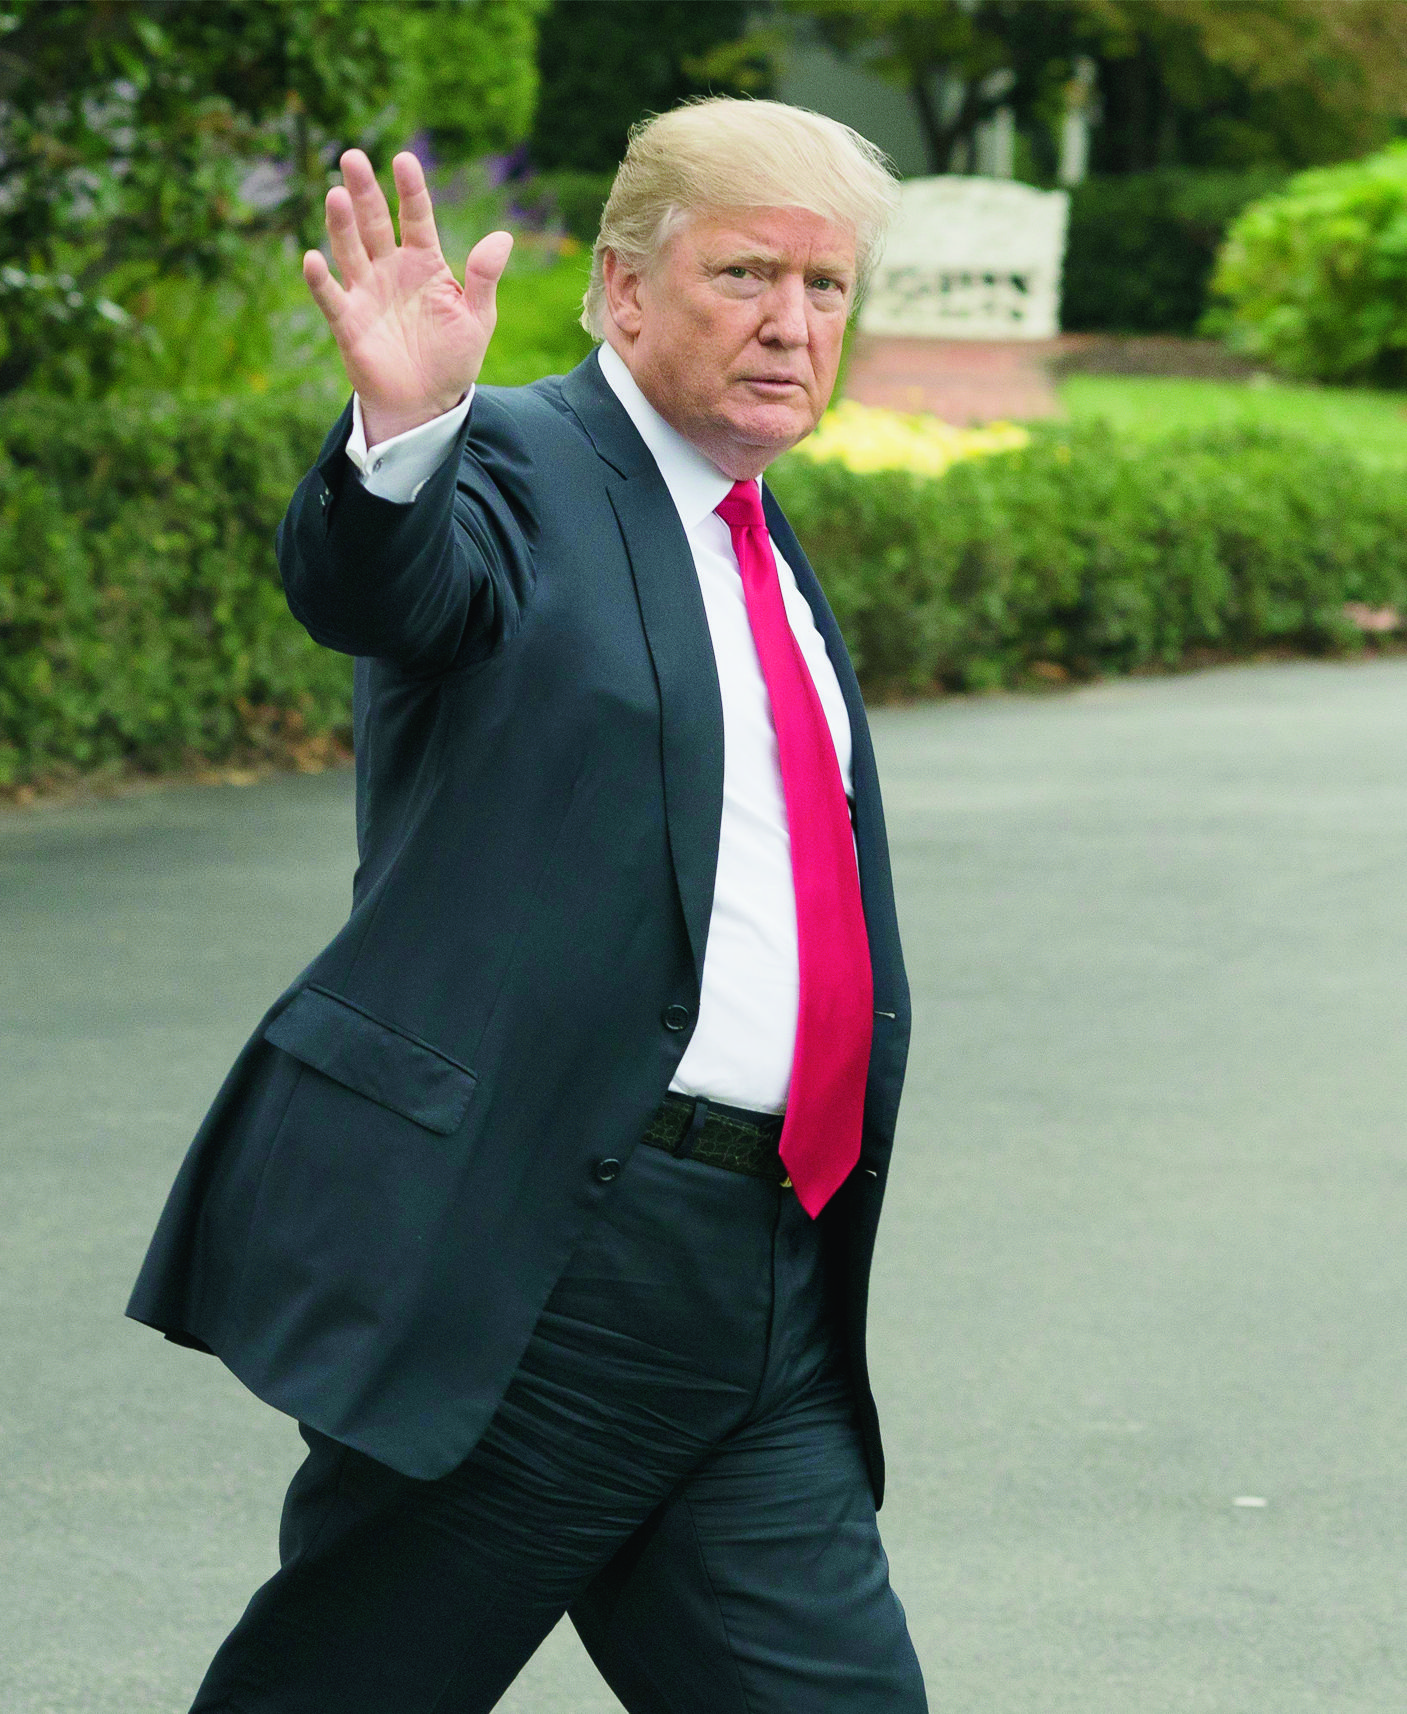 epa06259883 US President Donald J. Trump waves as he walks out to depart the South Lawn of the White House by Marine One in Washington DC, USA, 11 October 2017. Trump travels to Harrisburg, Pennsylvania, to deliver remarks on his tax agenda.  EPA/MICHAEL REYNOLDS USA TRUMP WHITE HOUSE